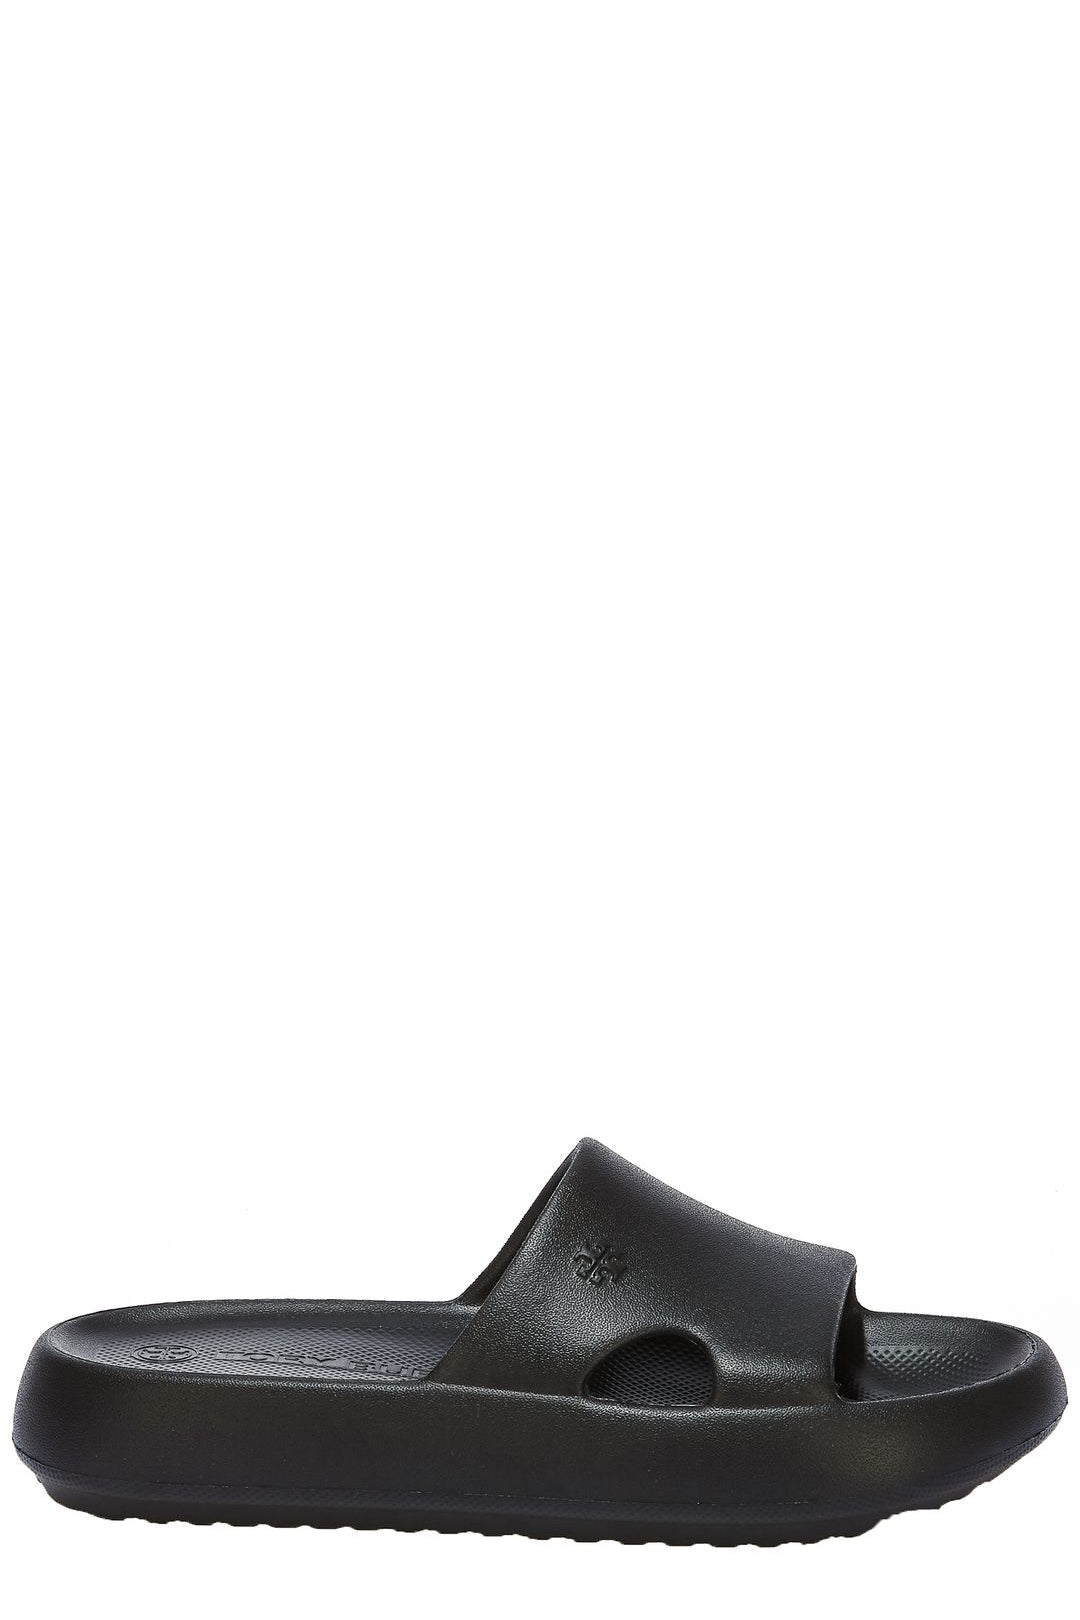 Tory Burch Double T Slides In Black | ModeSens